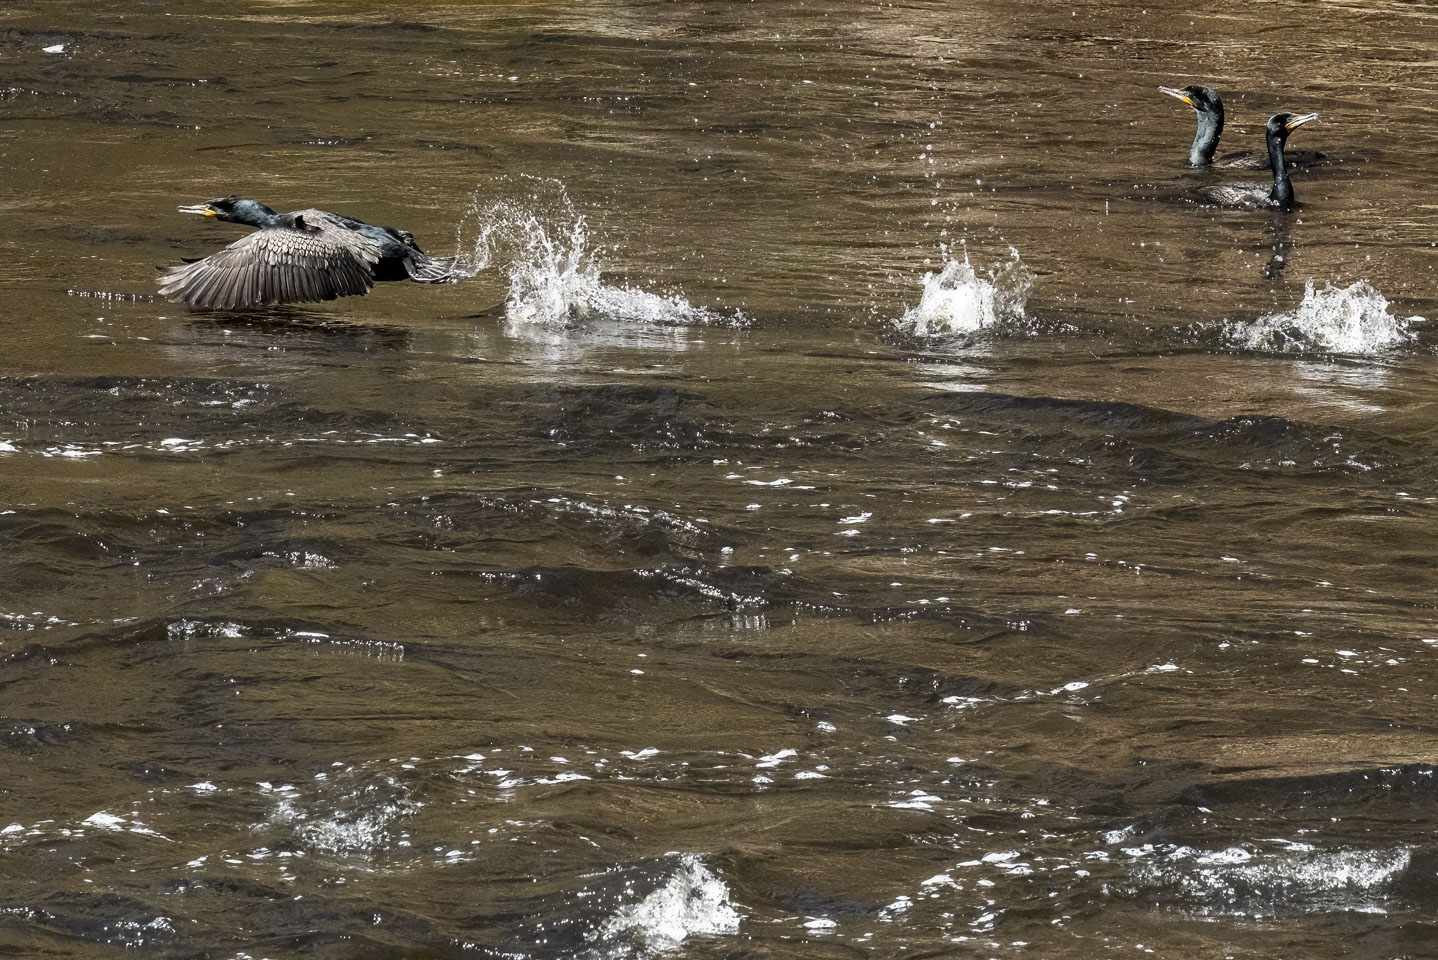 A cormorant taking off with two others still in the water